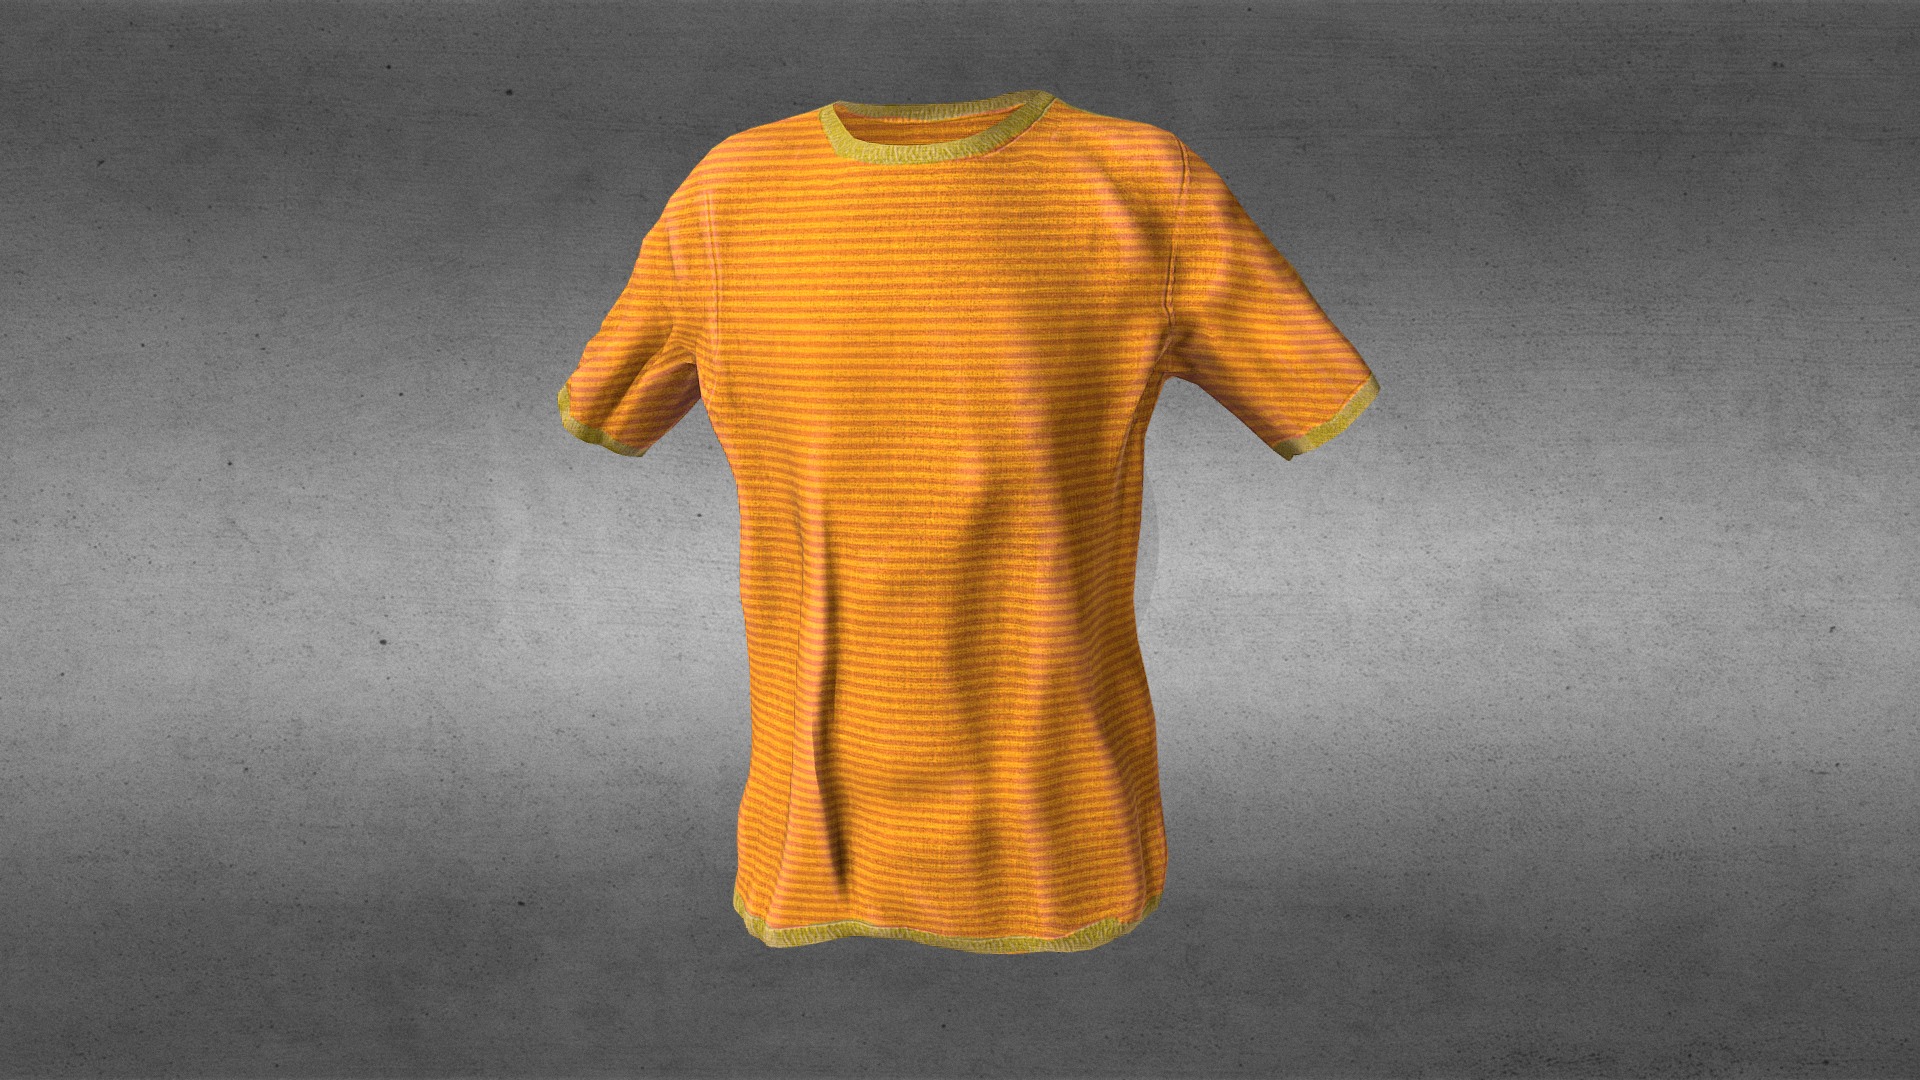 3D model T- Shirt lowpoly - This is a 3D model of the T- Shirt lowpoly. The 3D model is about a yellow and orange dress.